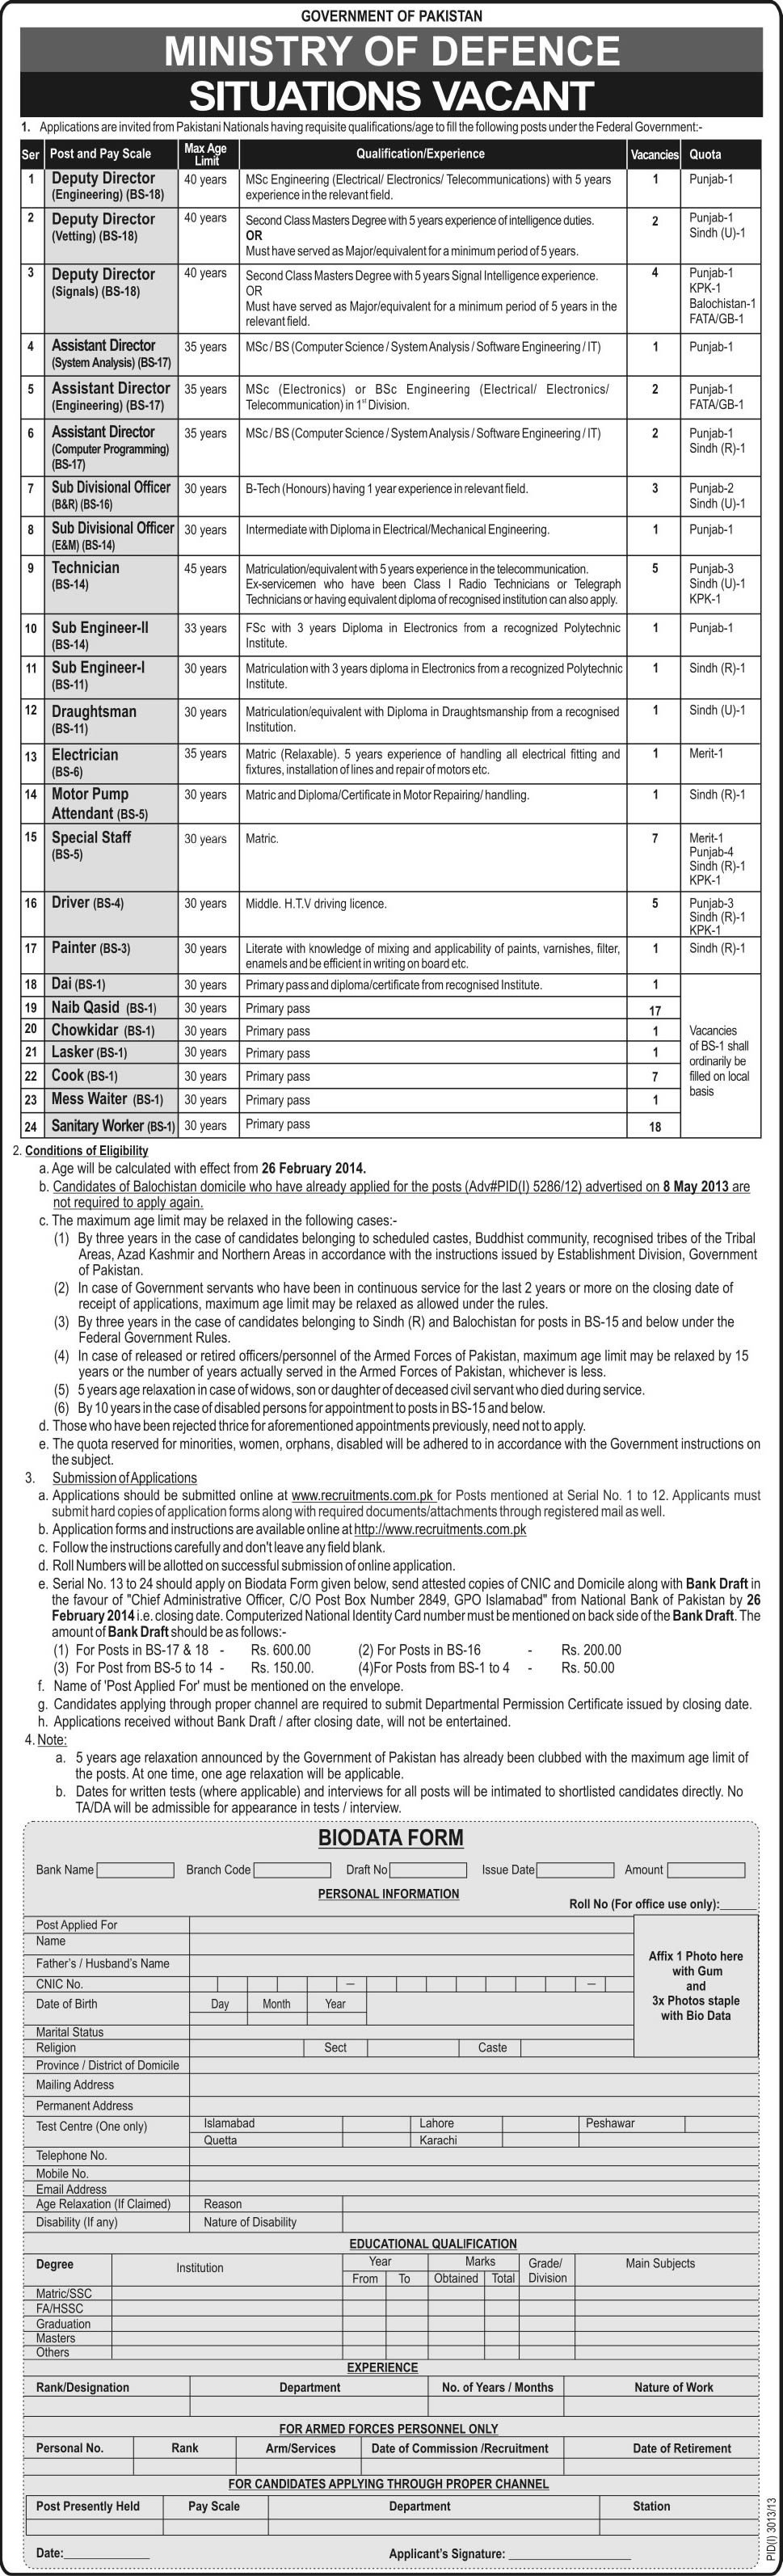 Ministry of Defence Jobs 2014 Apply Online Application Form